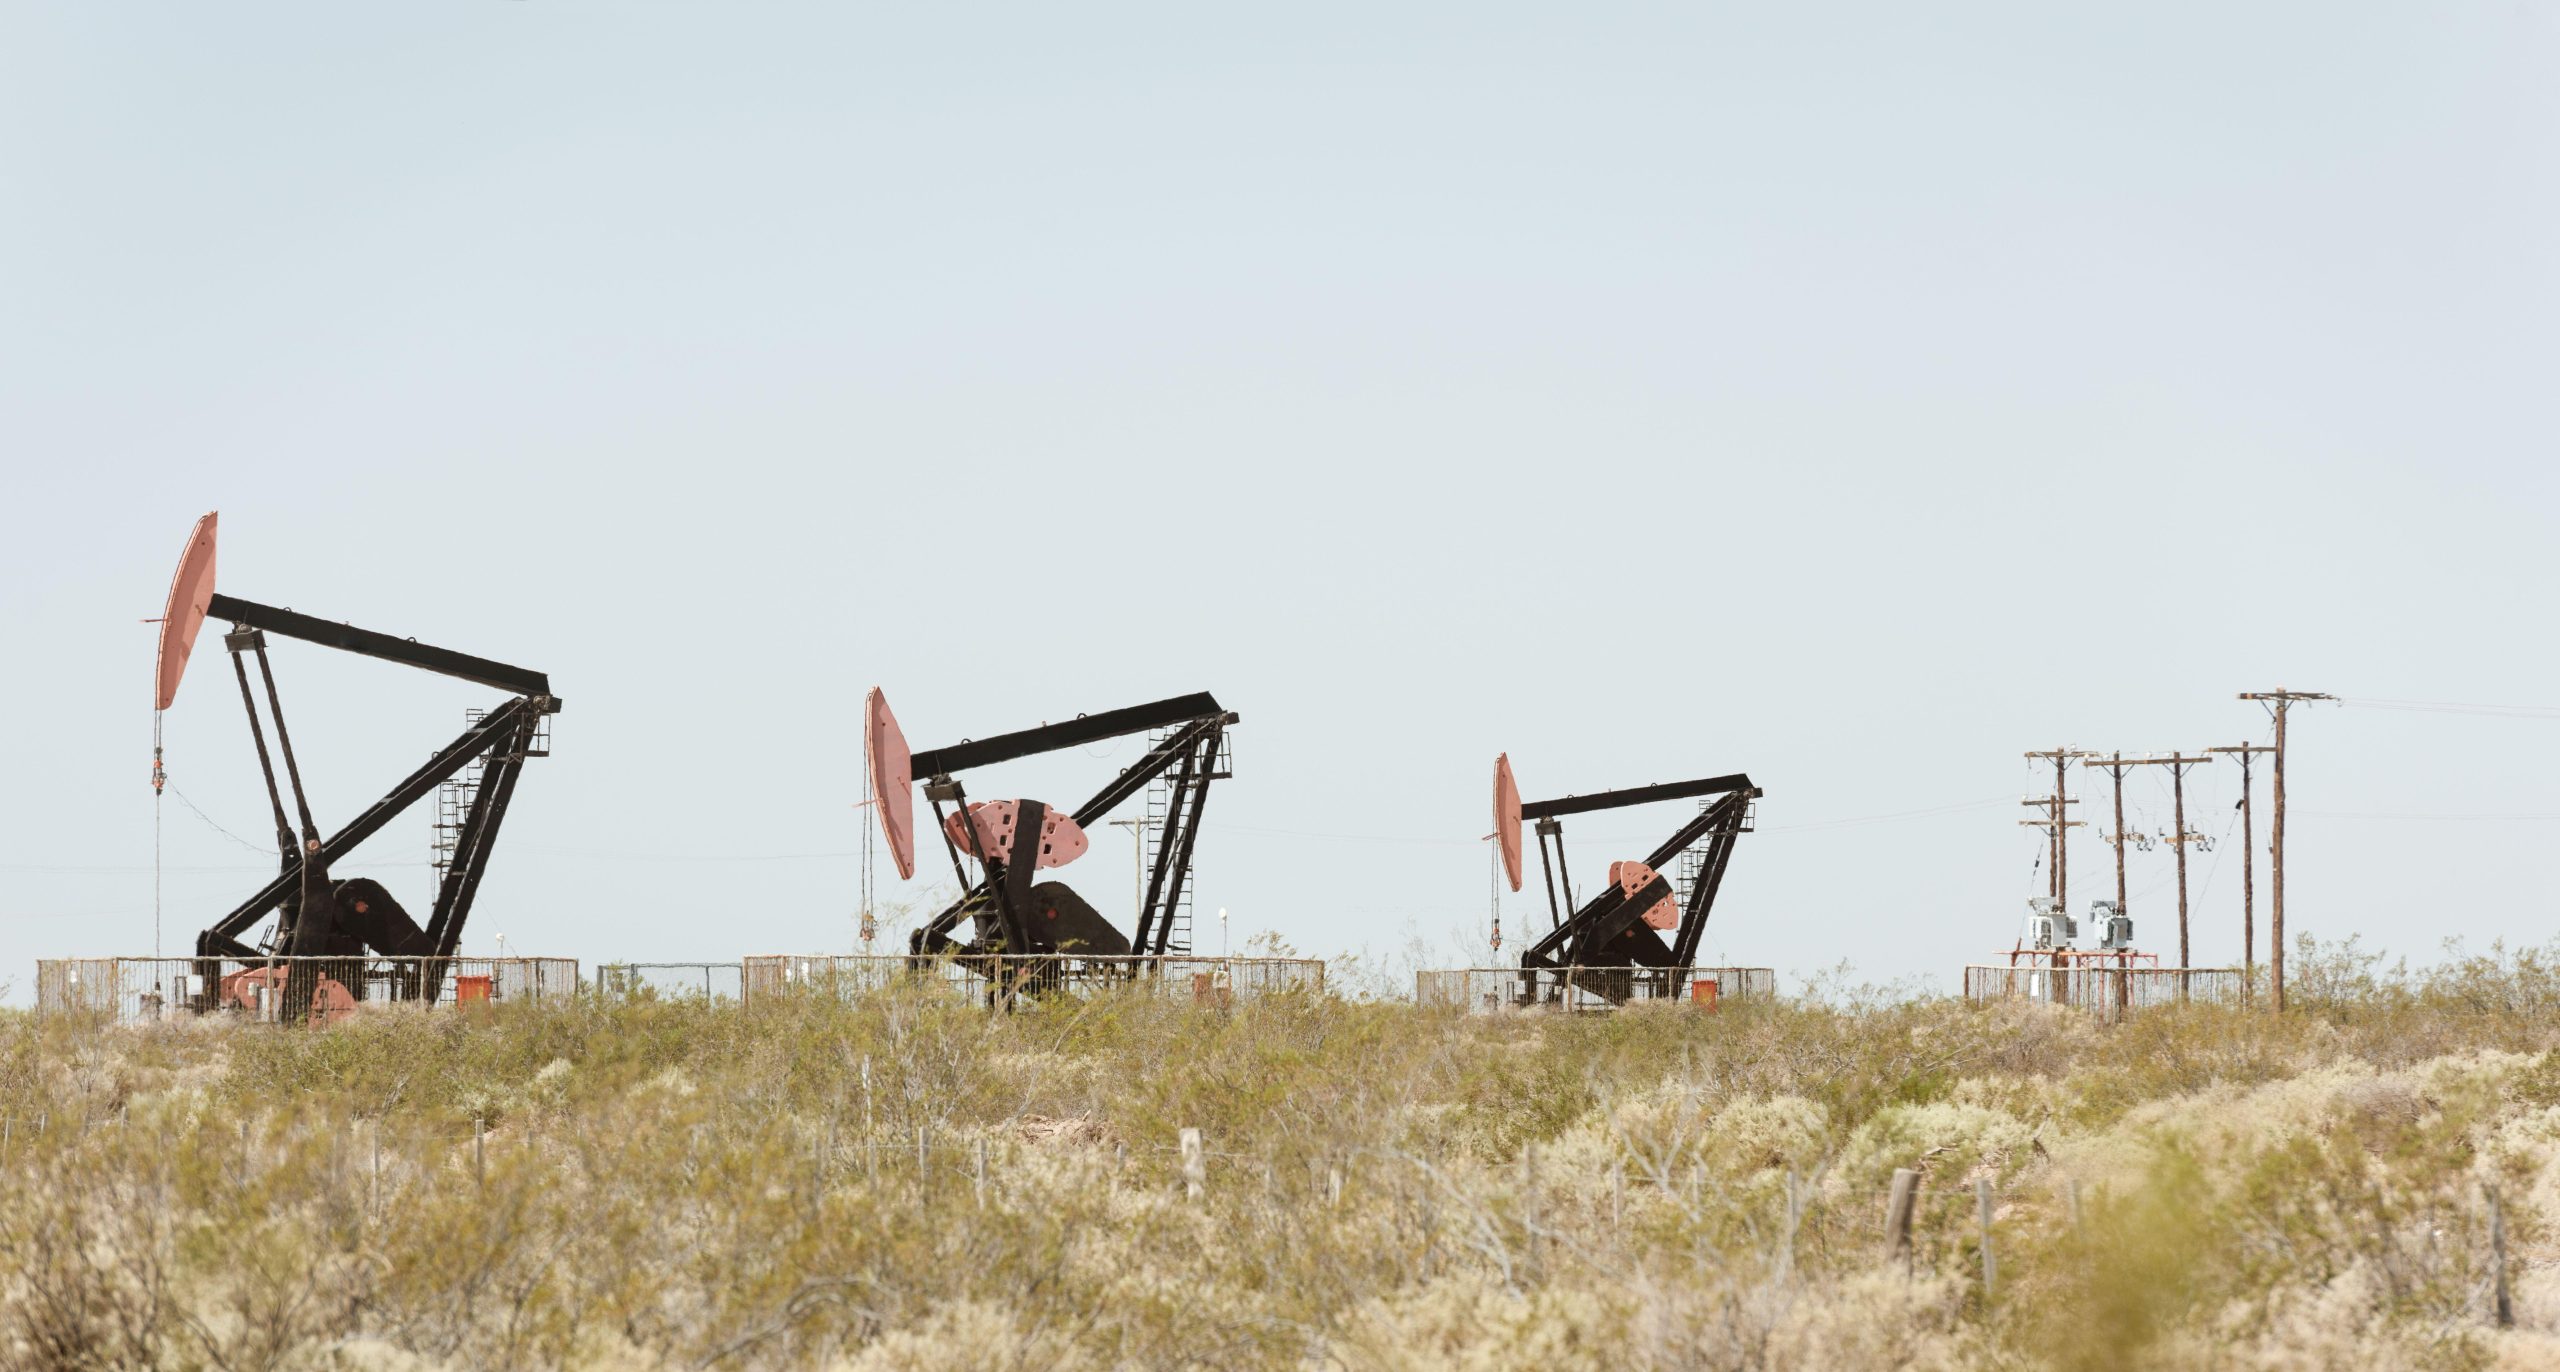 Oil pumpjacks at Vaca Muerta, a formation in Neuquen province, Argentina that holds significant oil and gas reserves